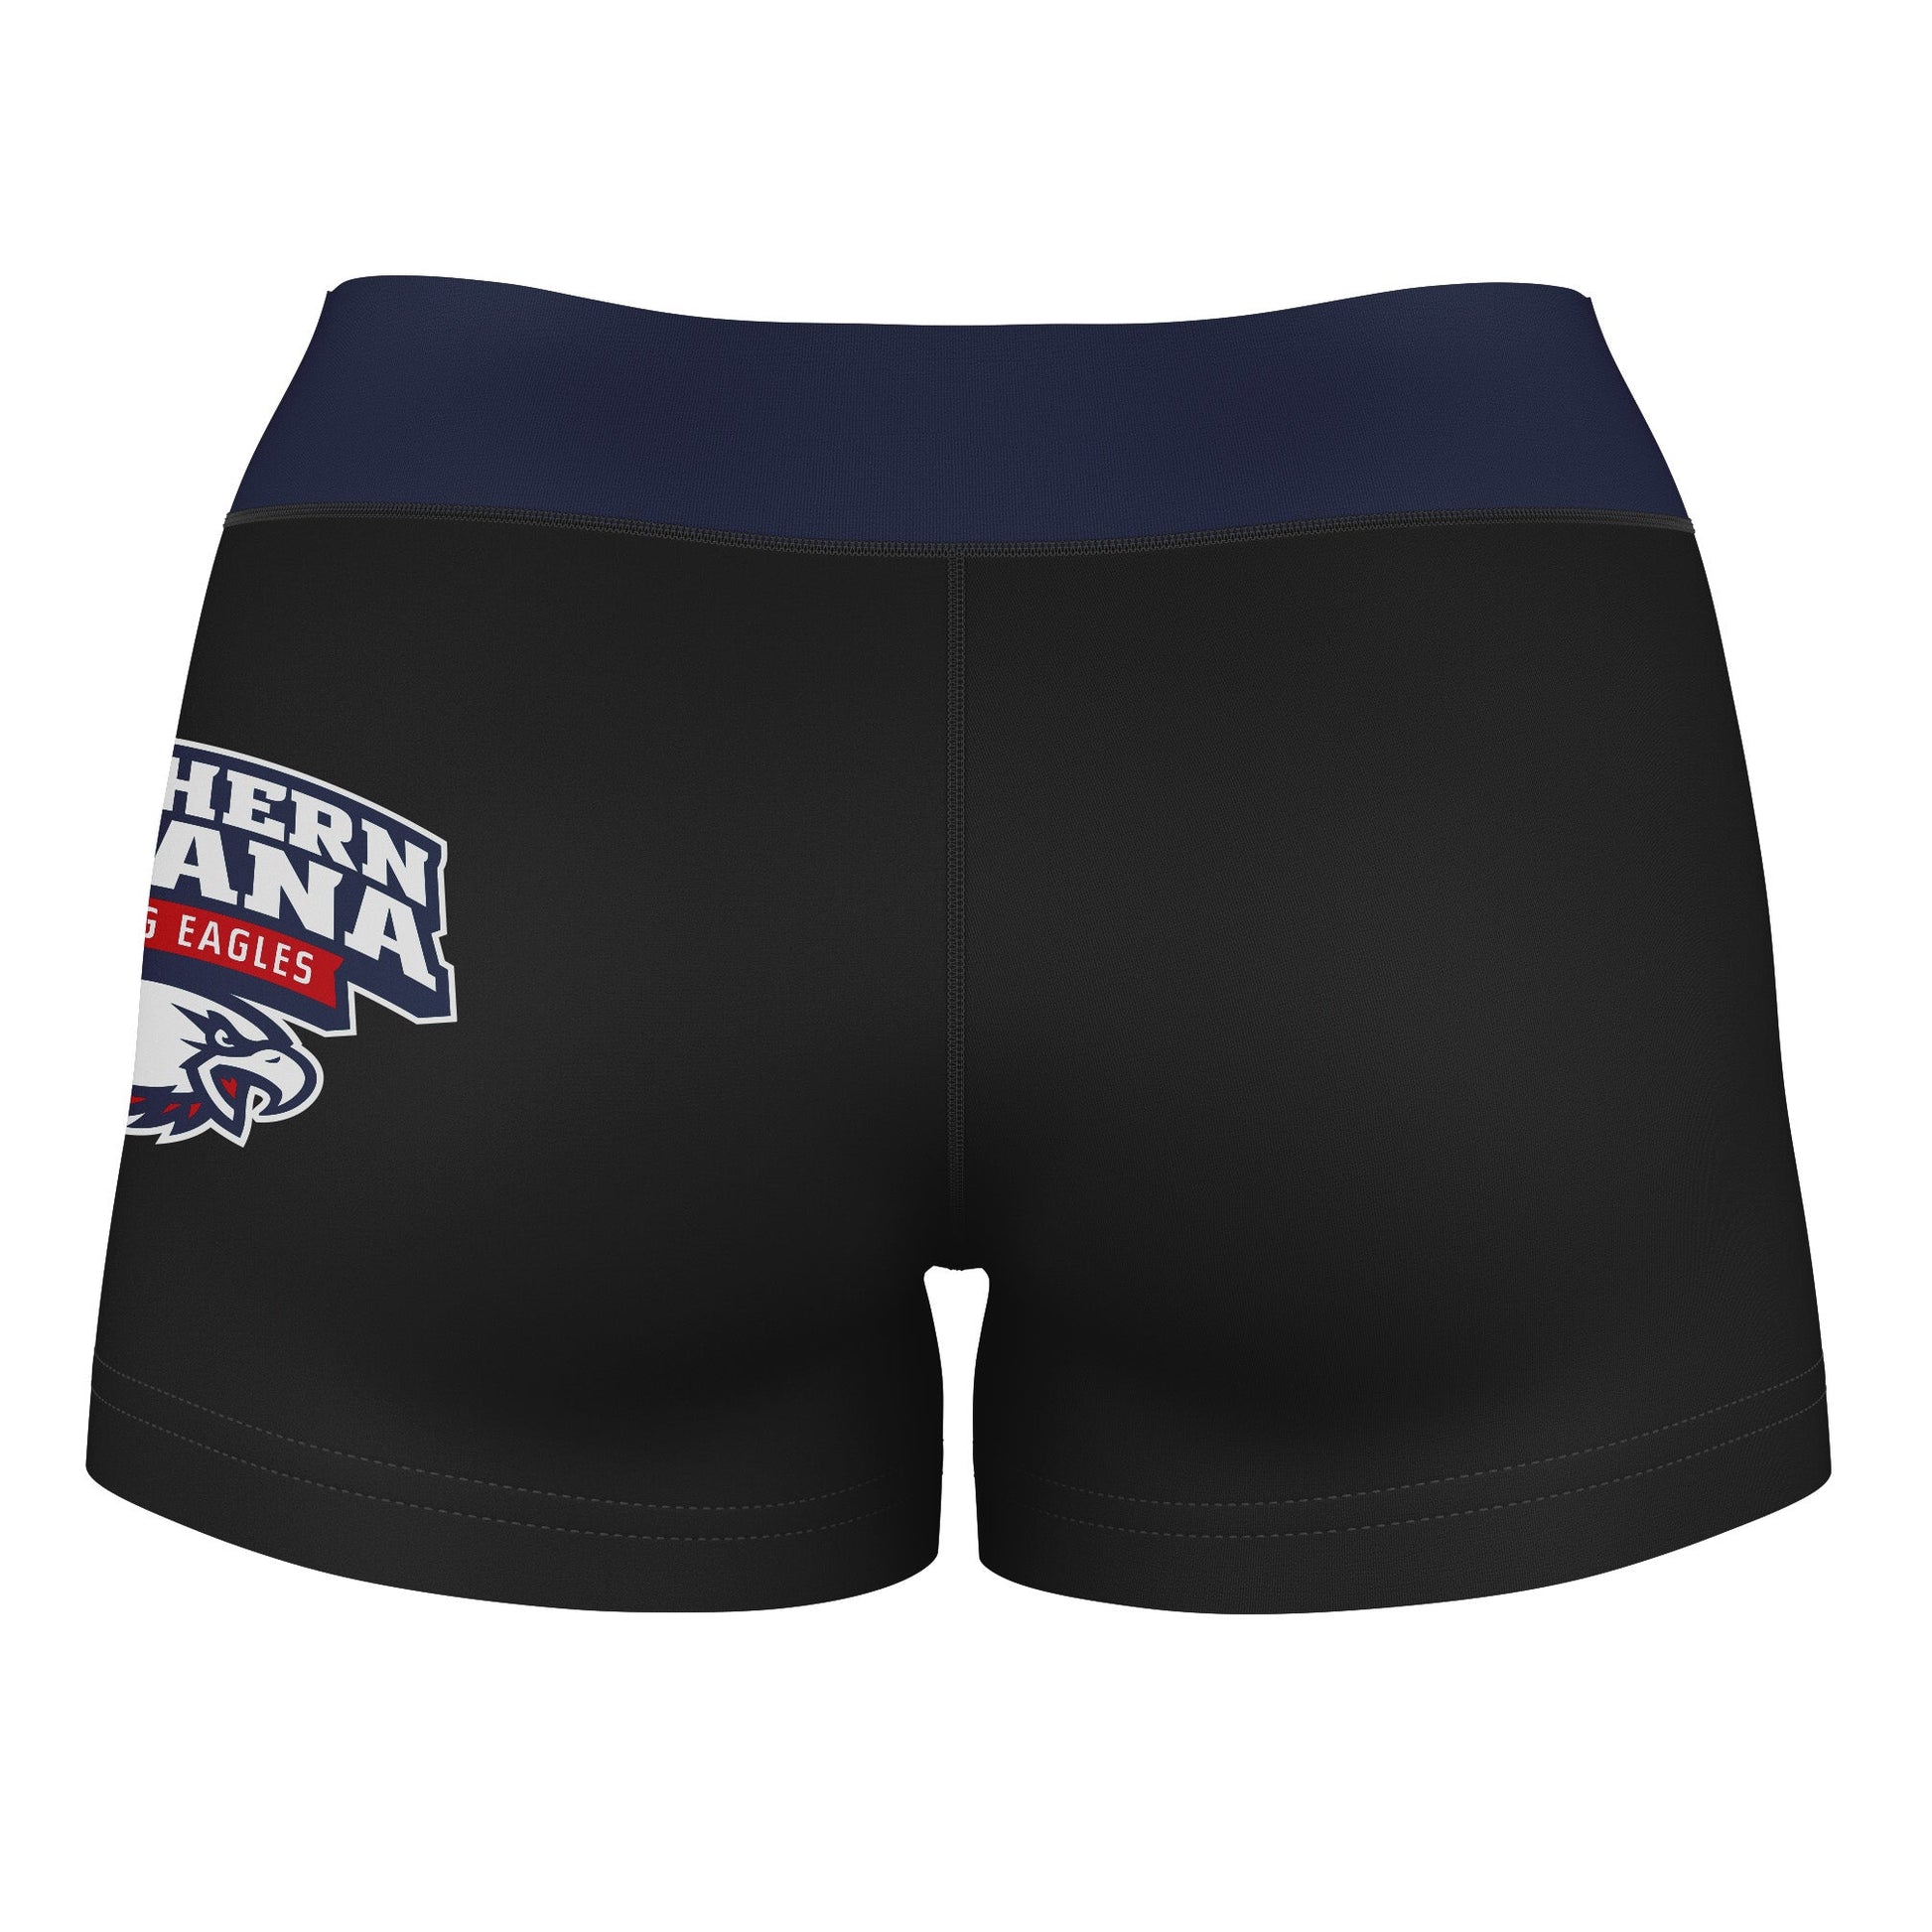 Southern Indiana Screaming Eagles Logo on Thigh & Waistband Black & Blue Women Yoga Booty Workout Shorts 3.75 Inseam" - Vive La F̻te - Online Apparel Store